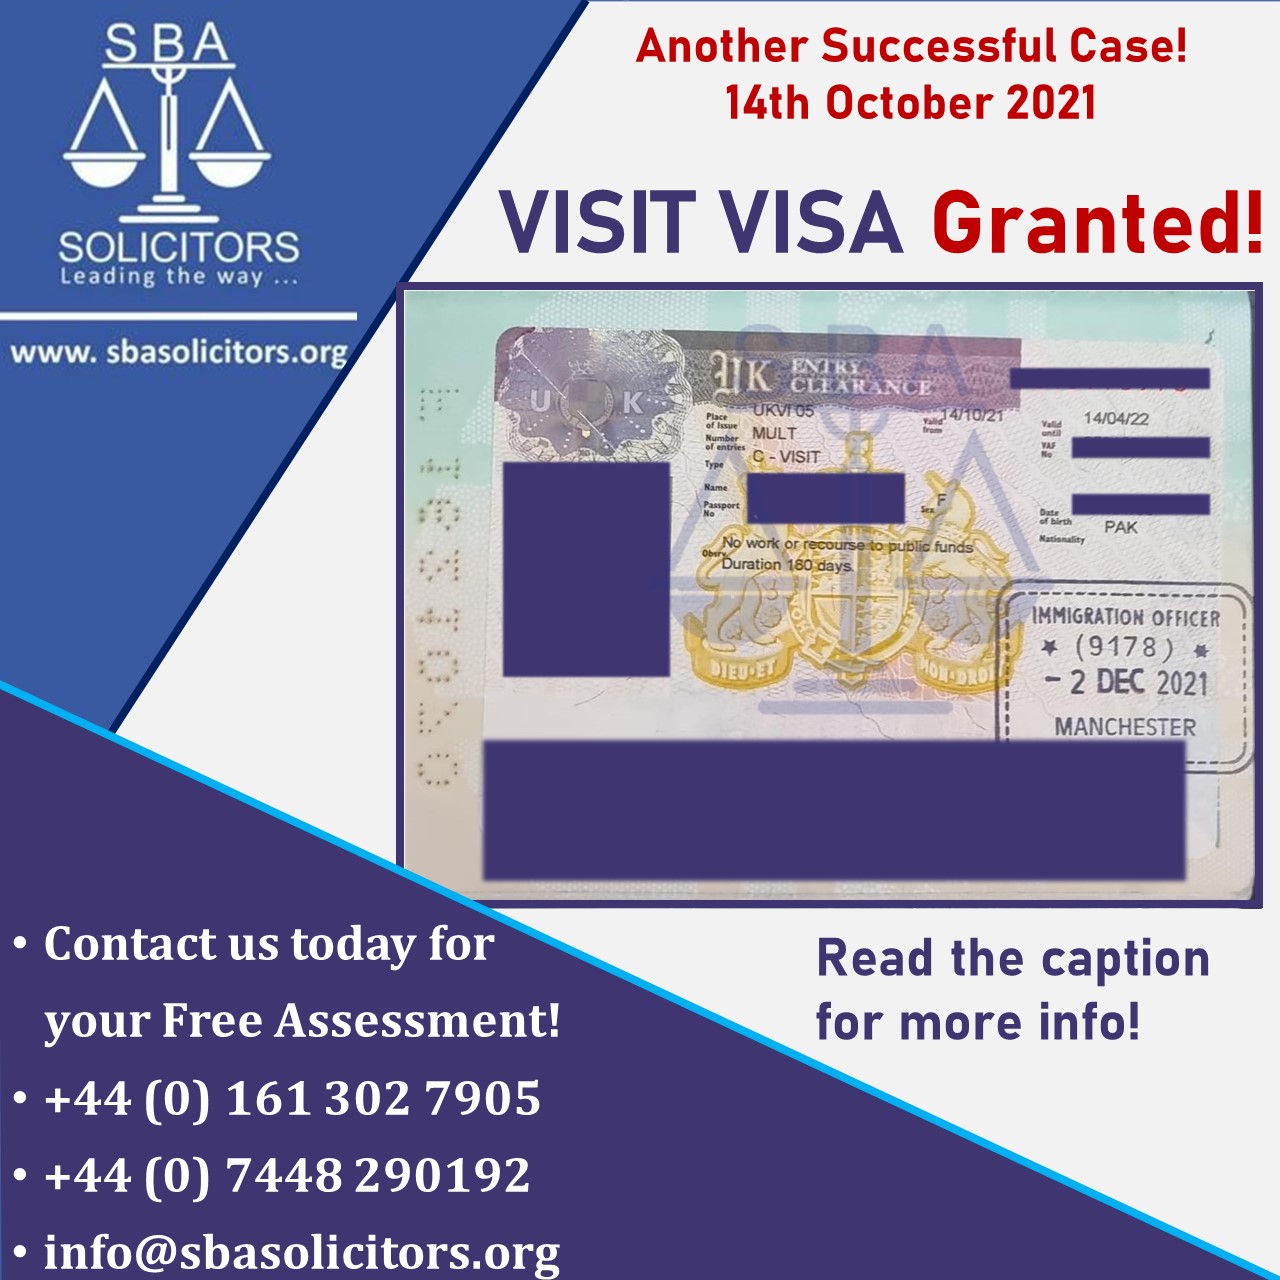 ‏💯Another Successful case! The client entered the UK on 2nd December!  🔴We applied for our client's visit visa from Pakistan, even with the Covid situation! 🟢Our client entered the UK on 2nd December to visit her son and his family! 💯This was her first visit to the UK!  🔴She was refused a visit visa before she came to SBA Solicitors, However, we made it possible for her to visit her son!  💯Here is what we did: - Consulted the client - Advised on the necessary document for visit visa - Advised on the financial requirements - Prepared their file - Filled their online application - Scanned and Uploaded all her documents - Booked her appointment - Chased the Home Office for the decision  💯She received her visa on 14th October and entered the UK on 2nd December!  🟢She can stay for 6 months and can enter the UK multiple times!  🔴Do you want to visit your family in the UK? Do you want to call someone to the UK for a visit? Just give us a call and we will get it sorted for you!  ☎️Contact us today for your free assessment!  +44 (0)161 302 7905 +44 (0) 7448 290192 ‏Info@sbasolicitos.org ‏Www.sbasolicitors.org